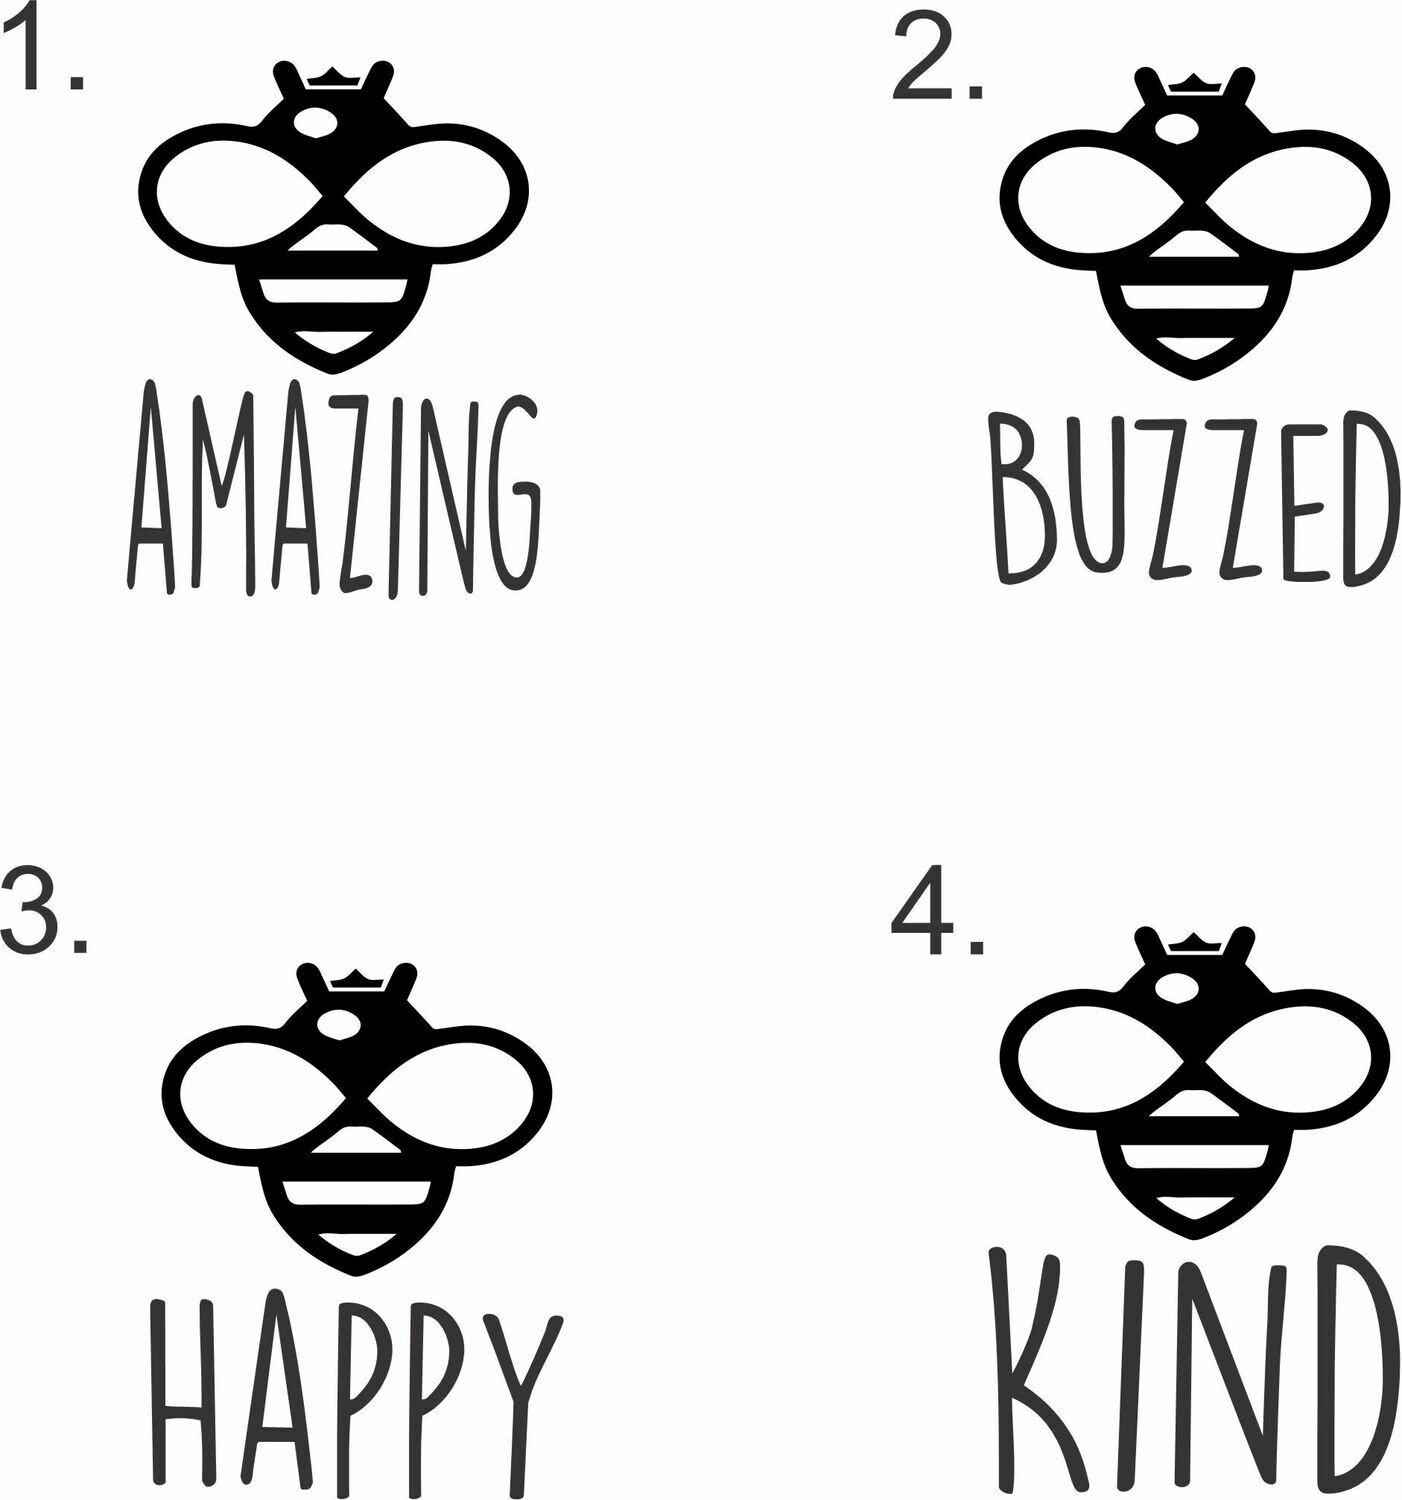 Bee Phrases (Amazing, Buzzed, Happy, Kind, or Your Word) Insulated Tumbler 30 oz